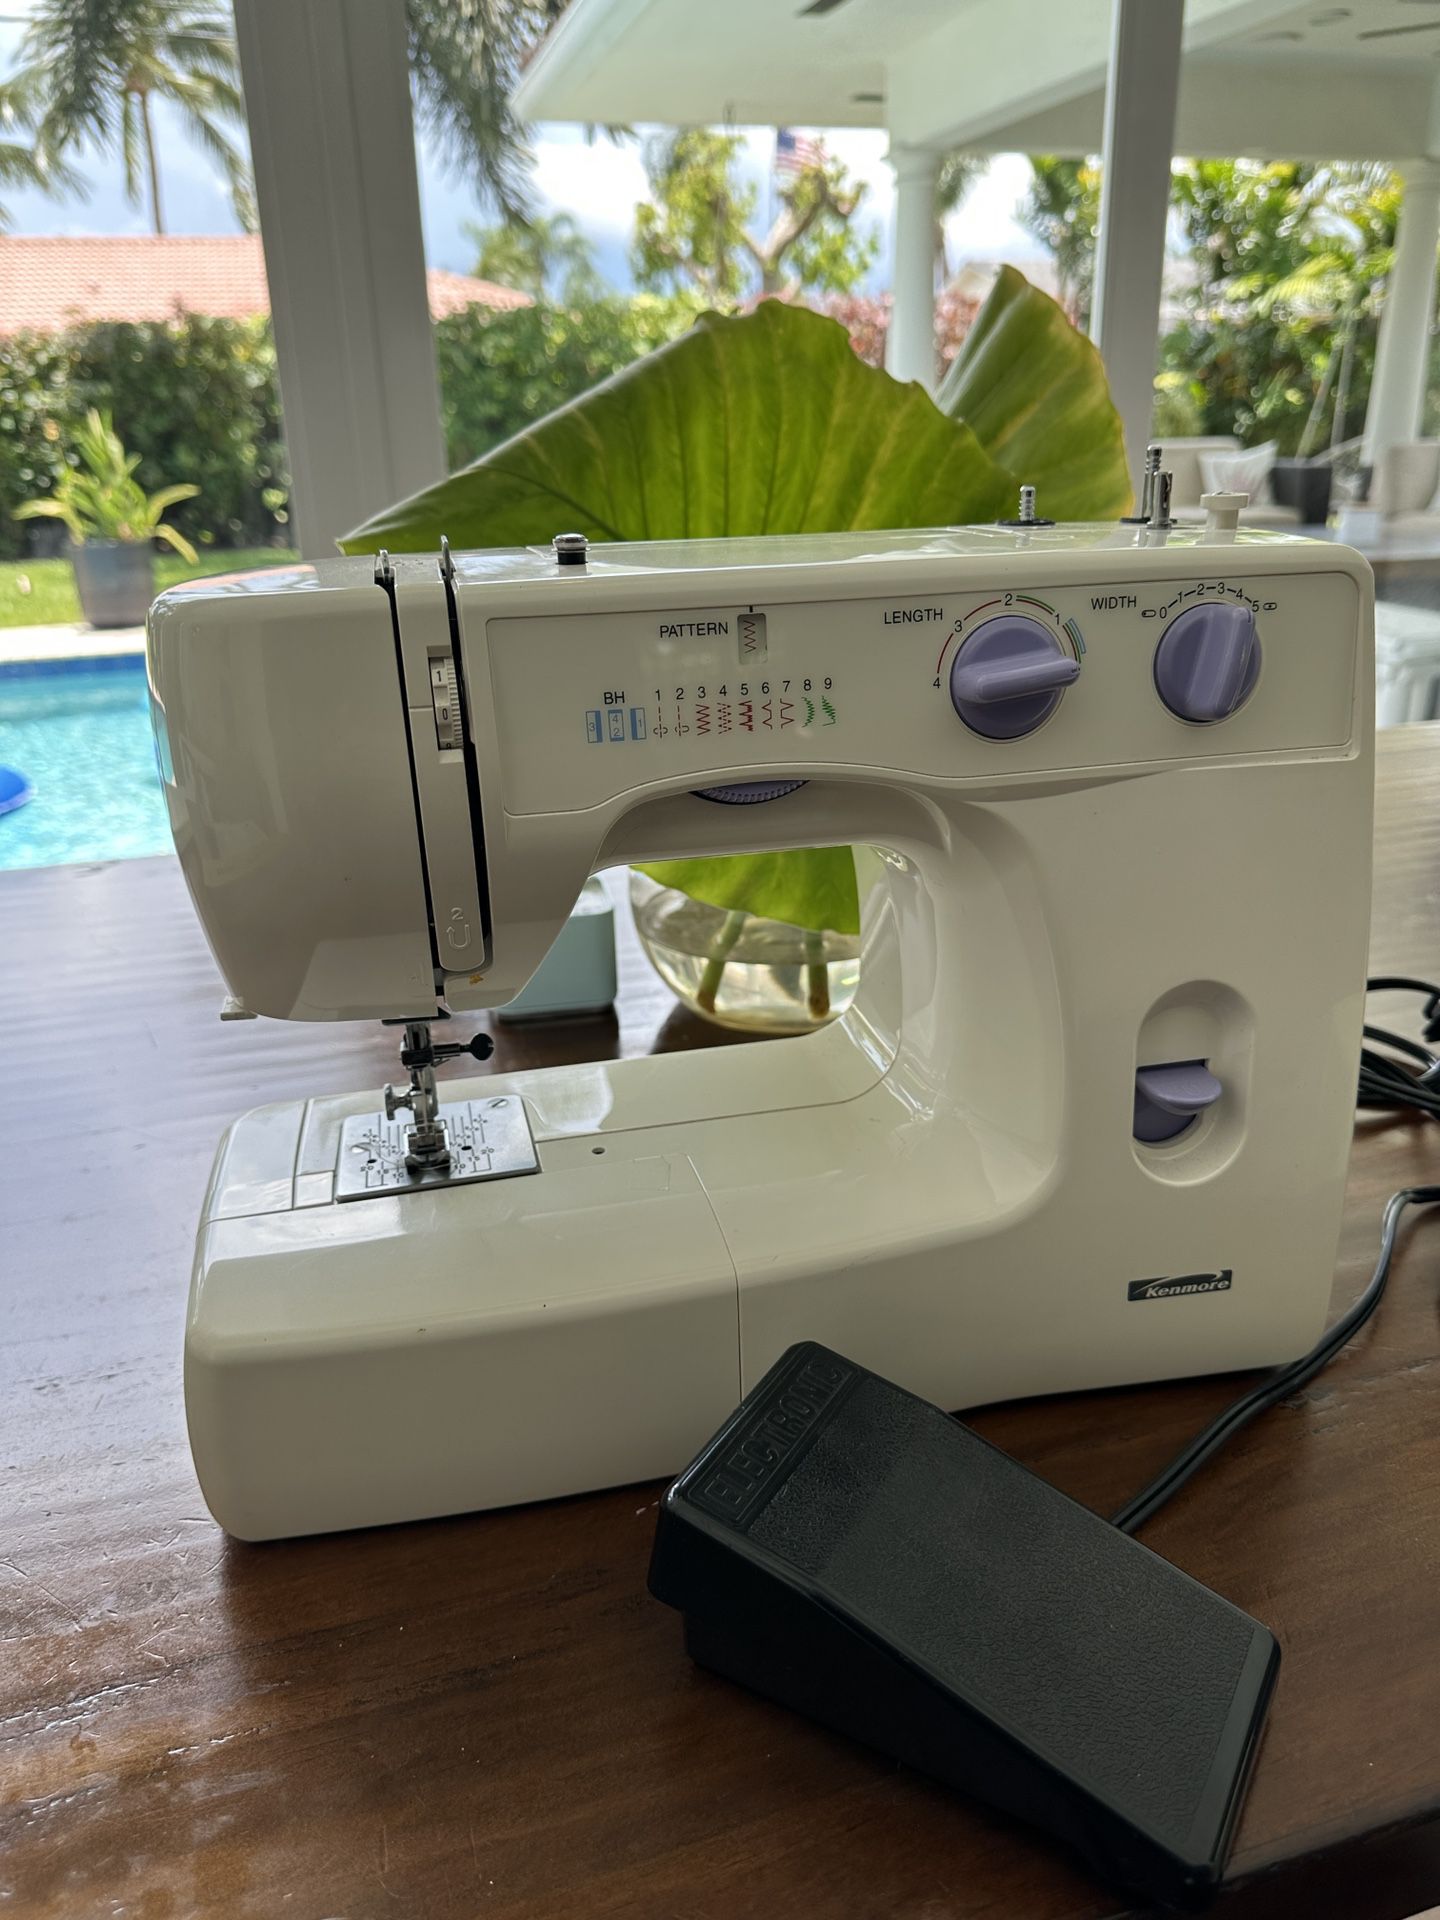 Kenmore Sewing Machine- Model 385 for Sale in Boca Raton, FL - OfferUp